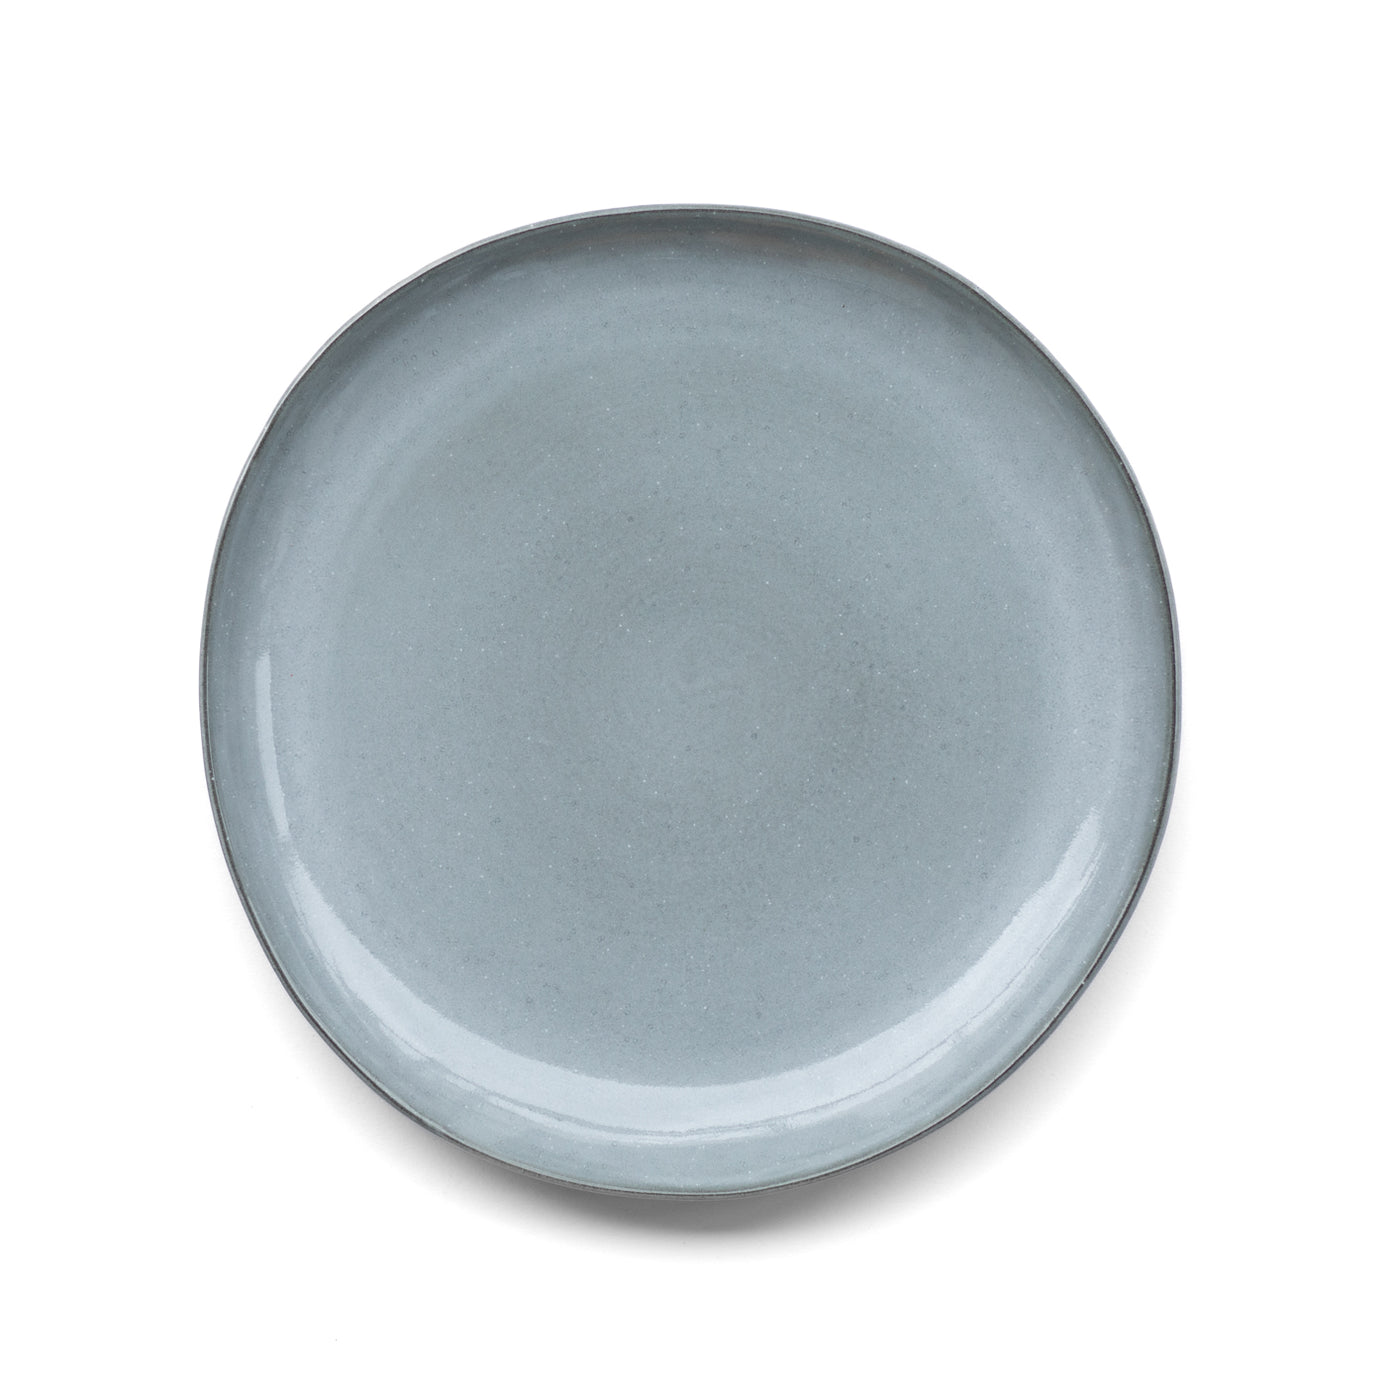 Stoneware dinnerware white plate large with gray green blue glaze